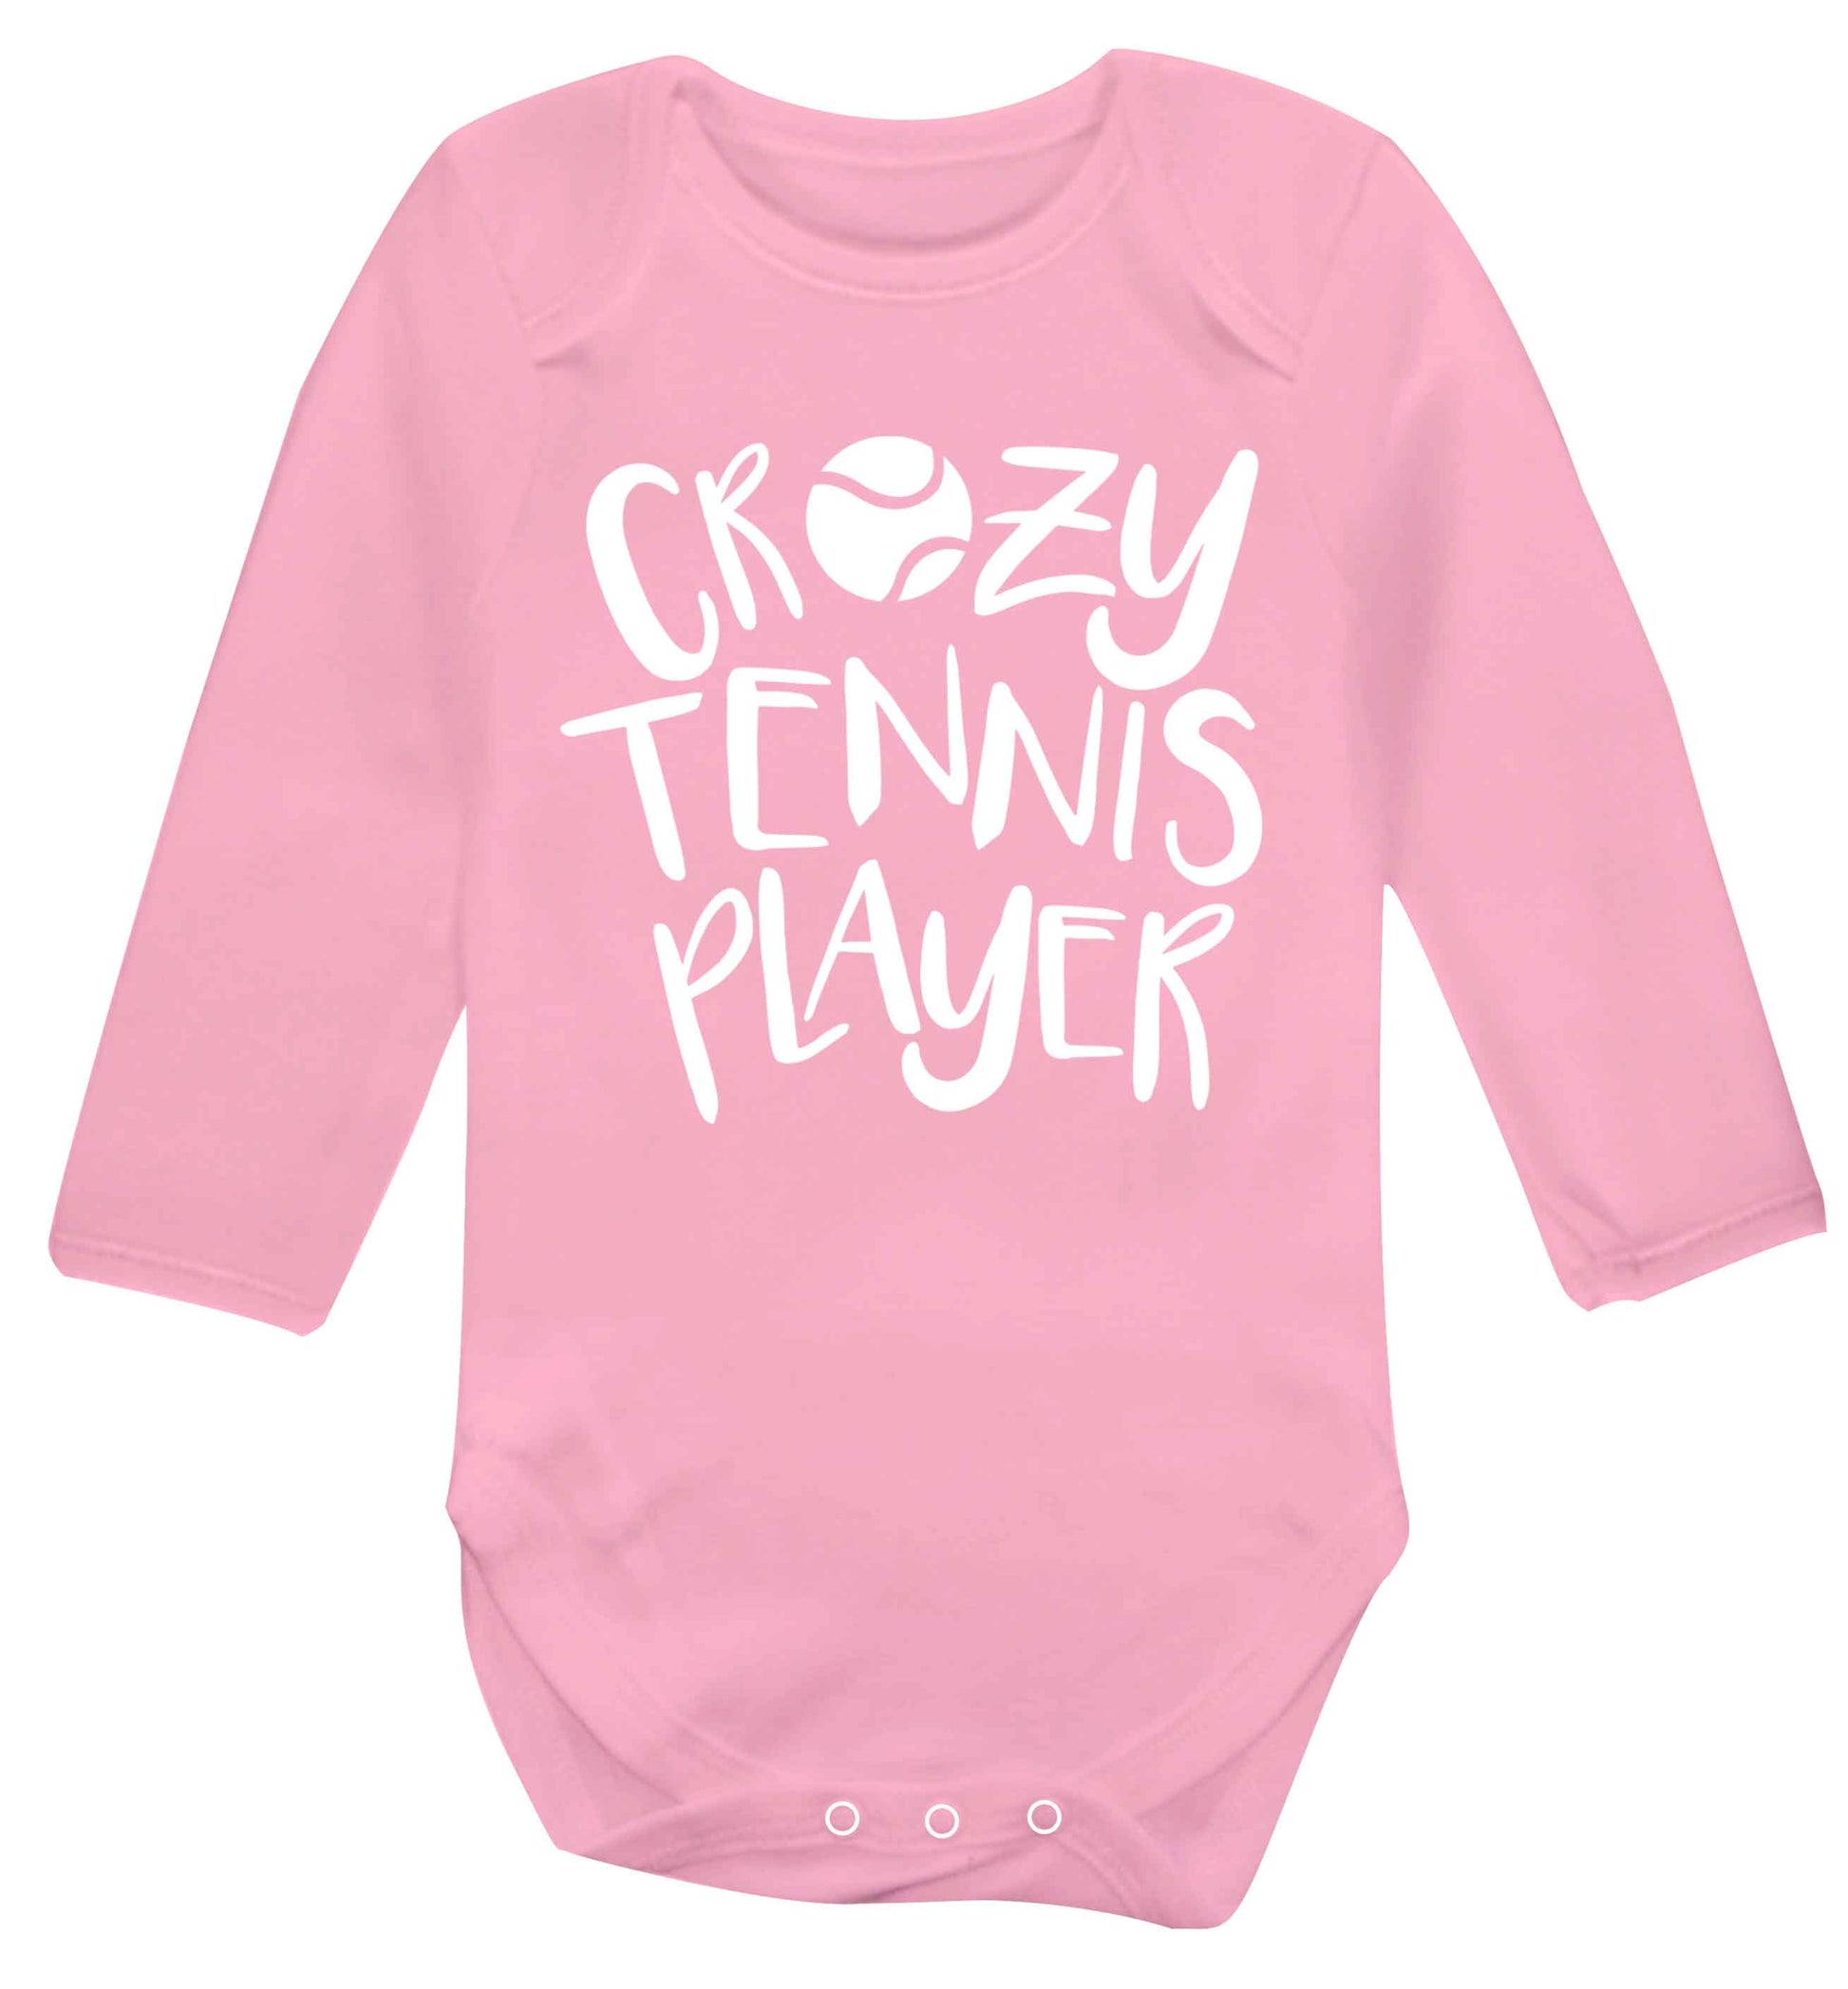 Crazy tennis player Baby Vest long sleeved pale pink 6-12 months